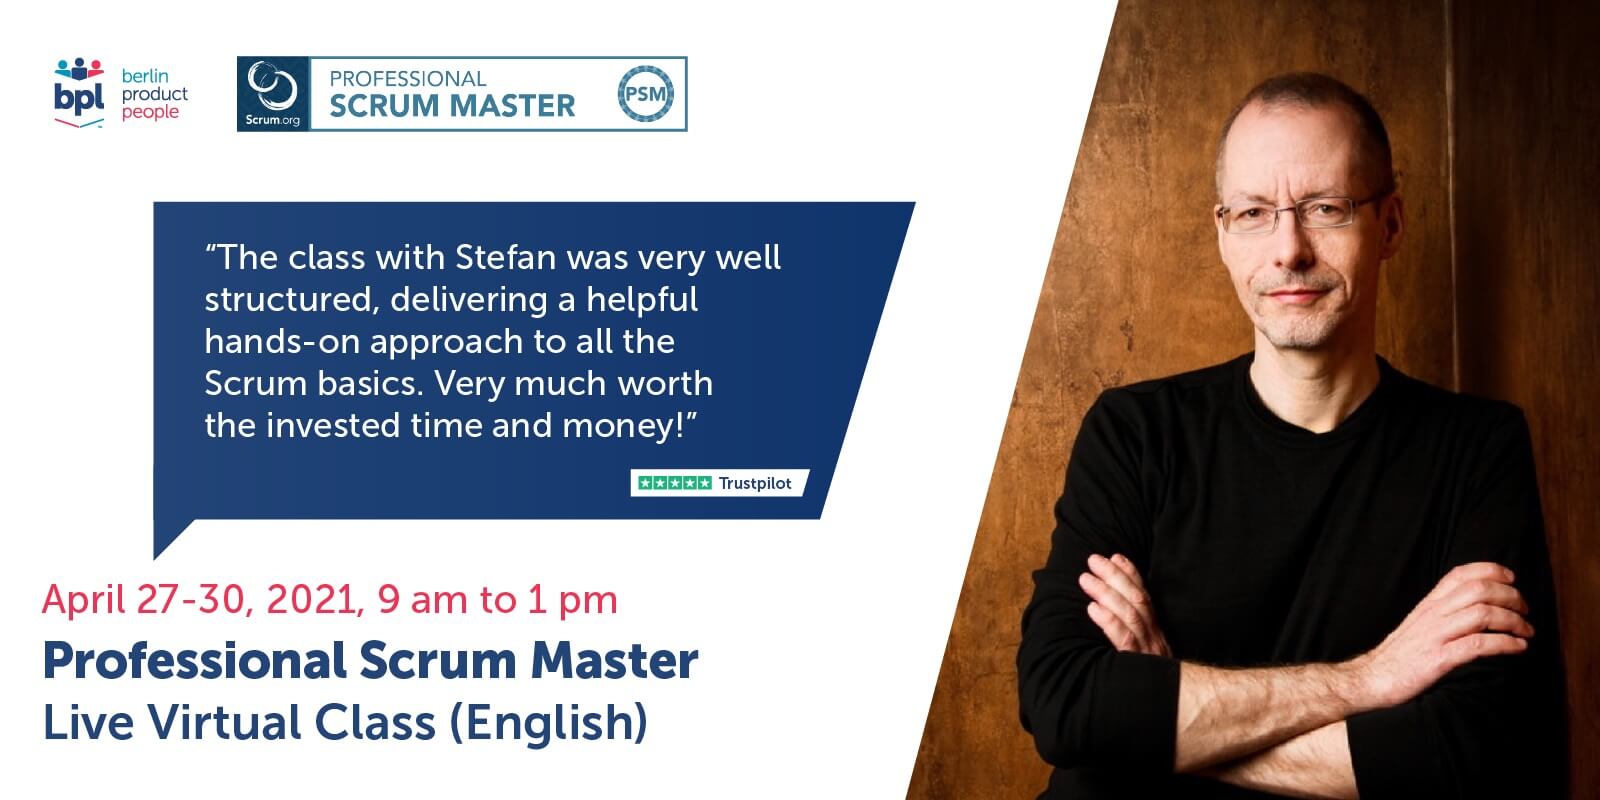 Professional Scrum Master Online Training w/ PSM Certificate — April 27-30, 2021 — Berlin Product People GmbH